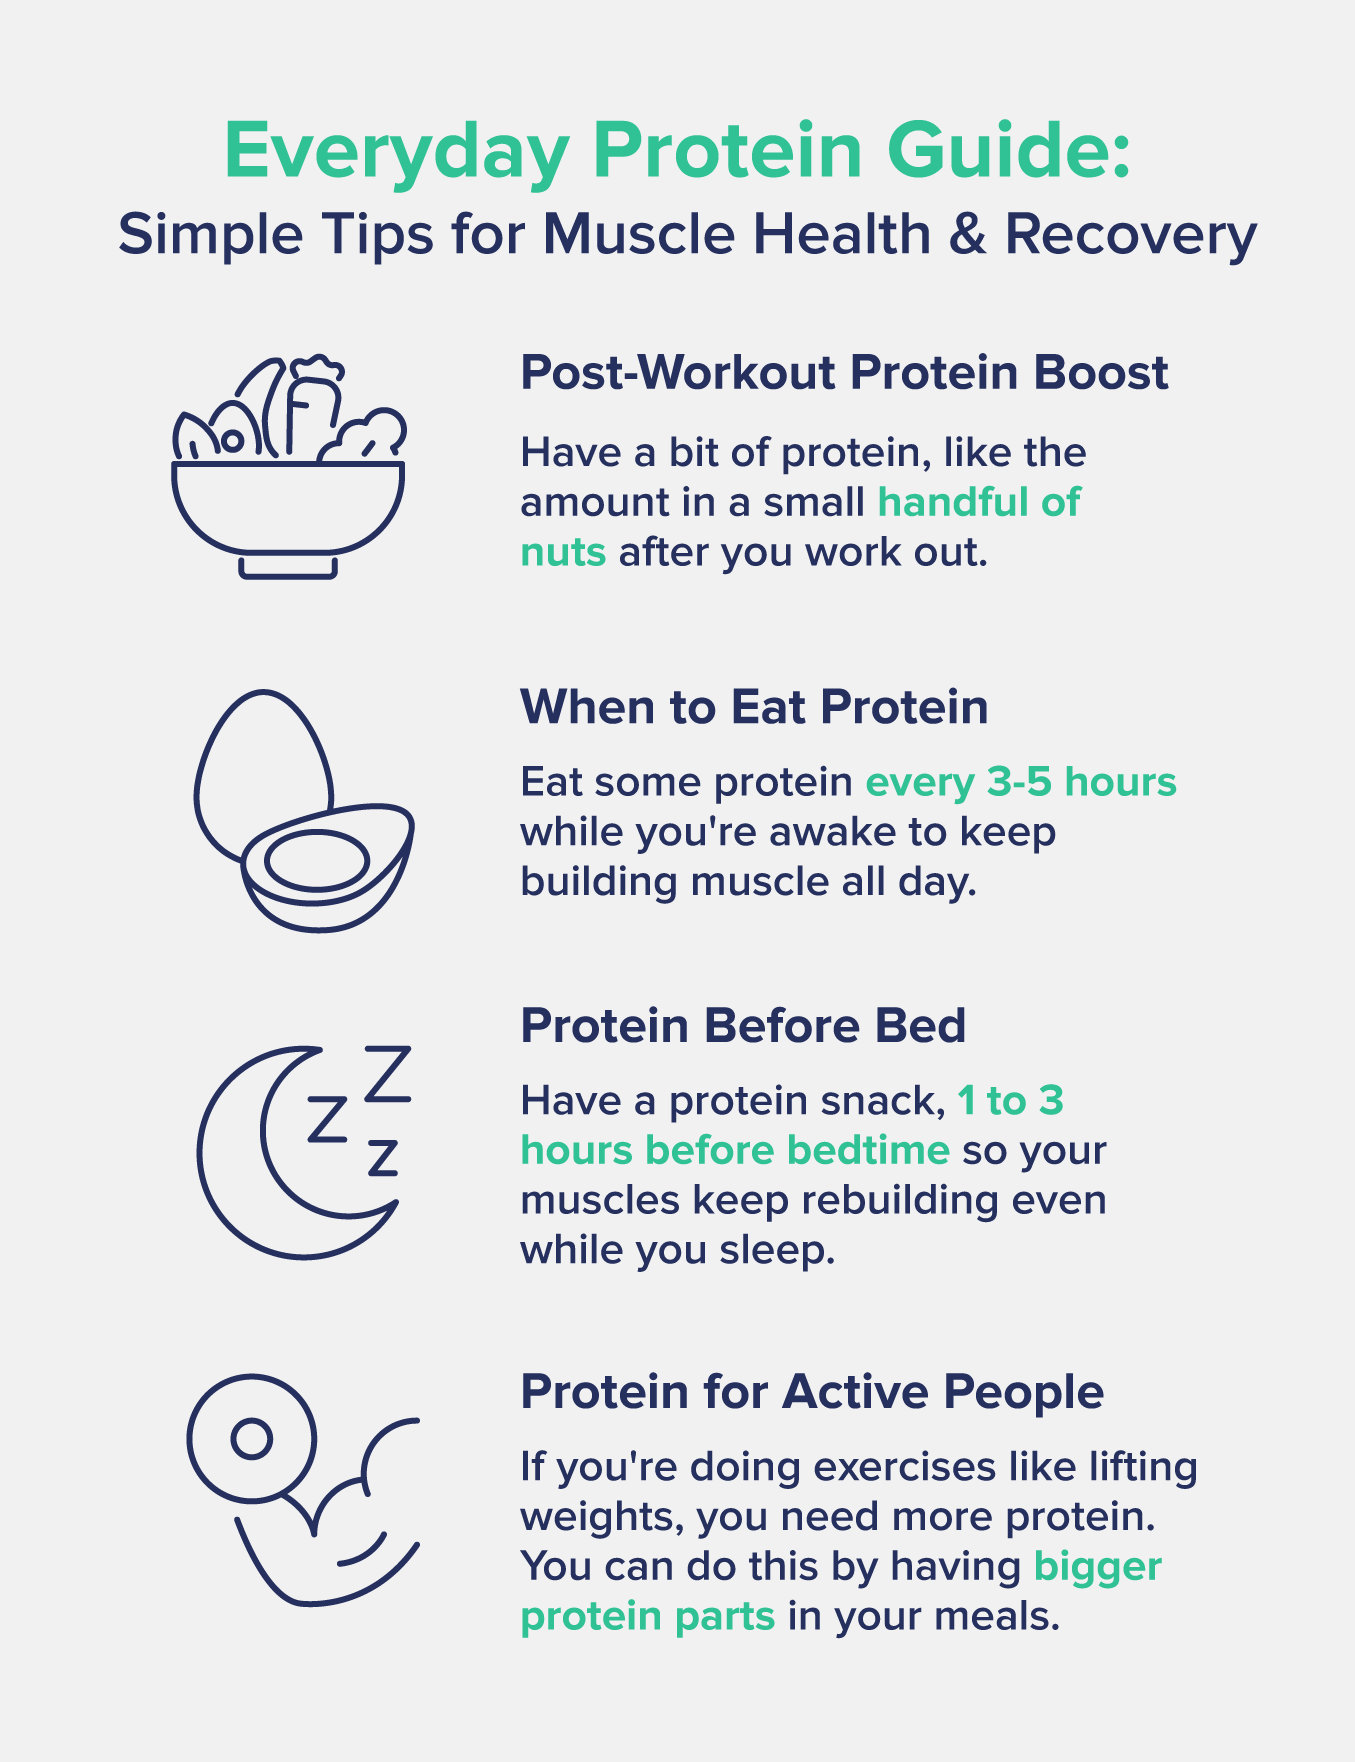 A graphic entitled "Everyday Protein Guide: Simple Tips for Muscle Health & Recovery" listing steps like "have a bit of protein after you work out" and "eat protein every 3-5 hours" with accompanying images. 